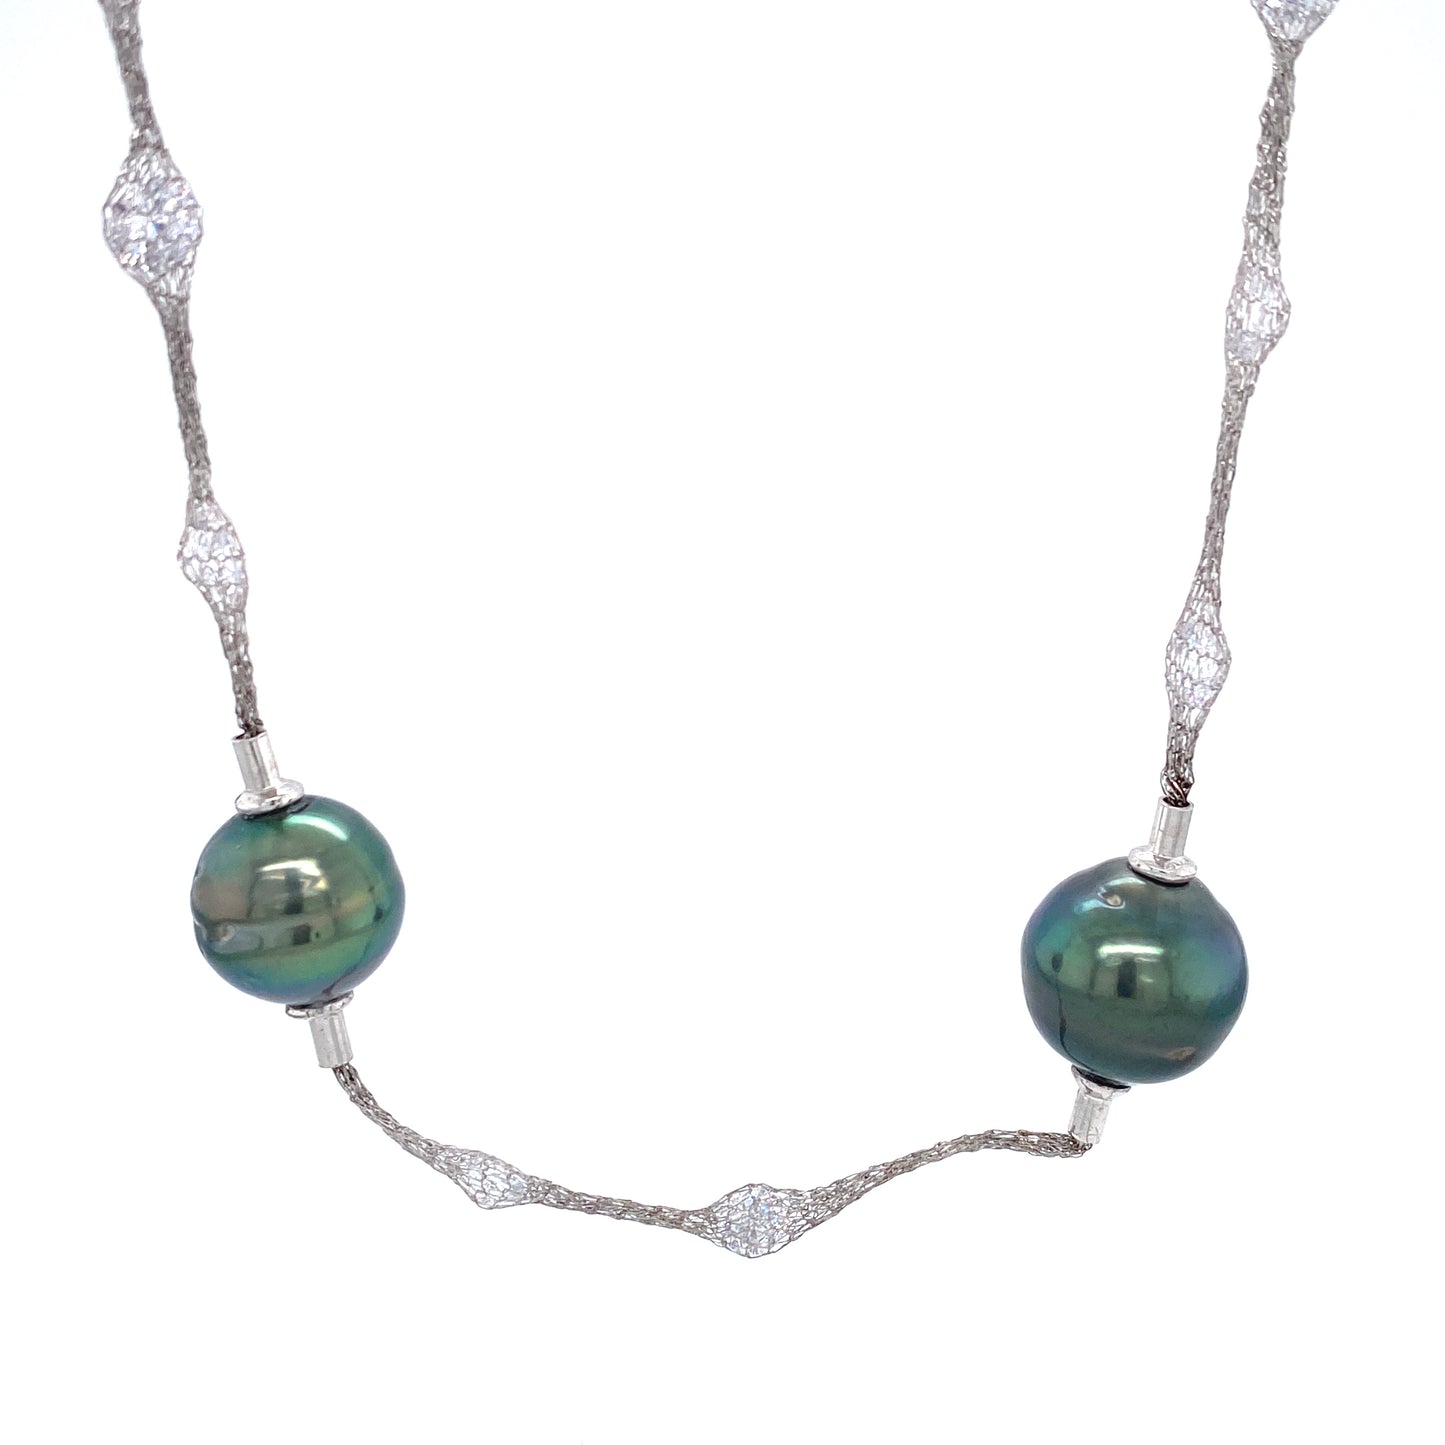 Iridescent Blue Pearls & Cubic Zirconia Silver Mesh Long Necklace | Antipodes Pearl | Luby 